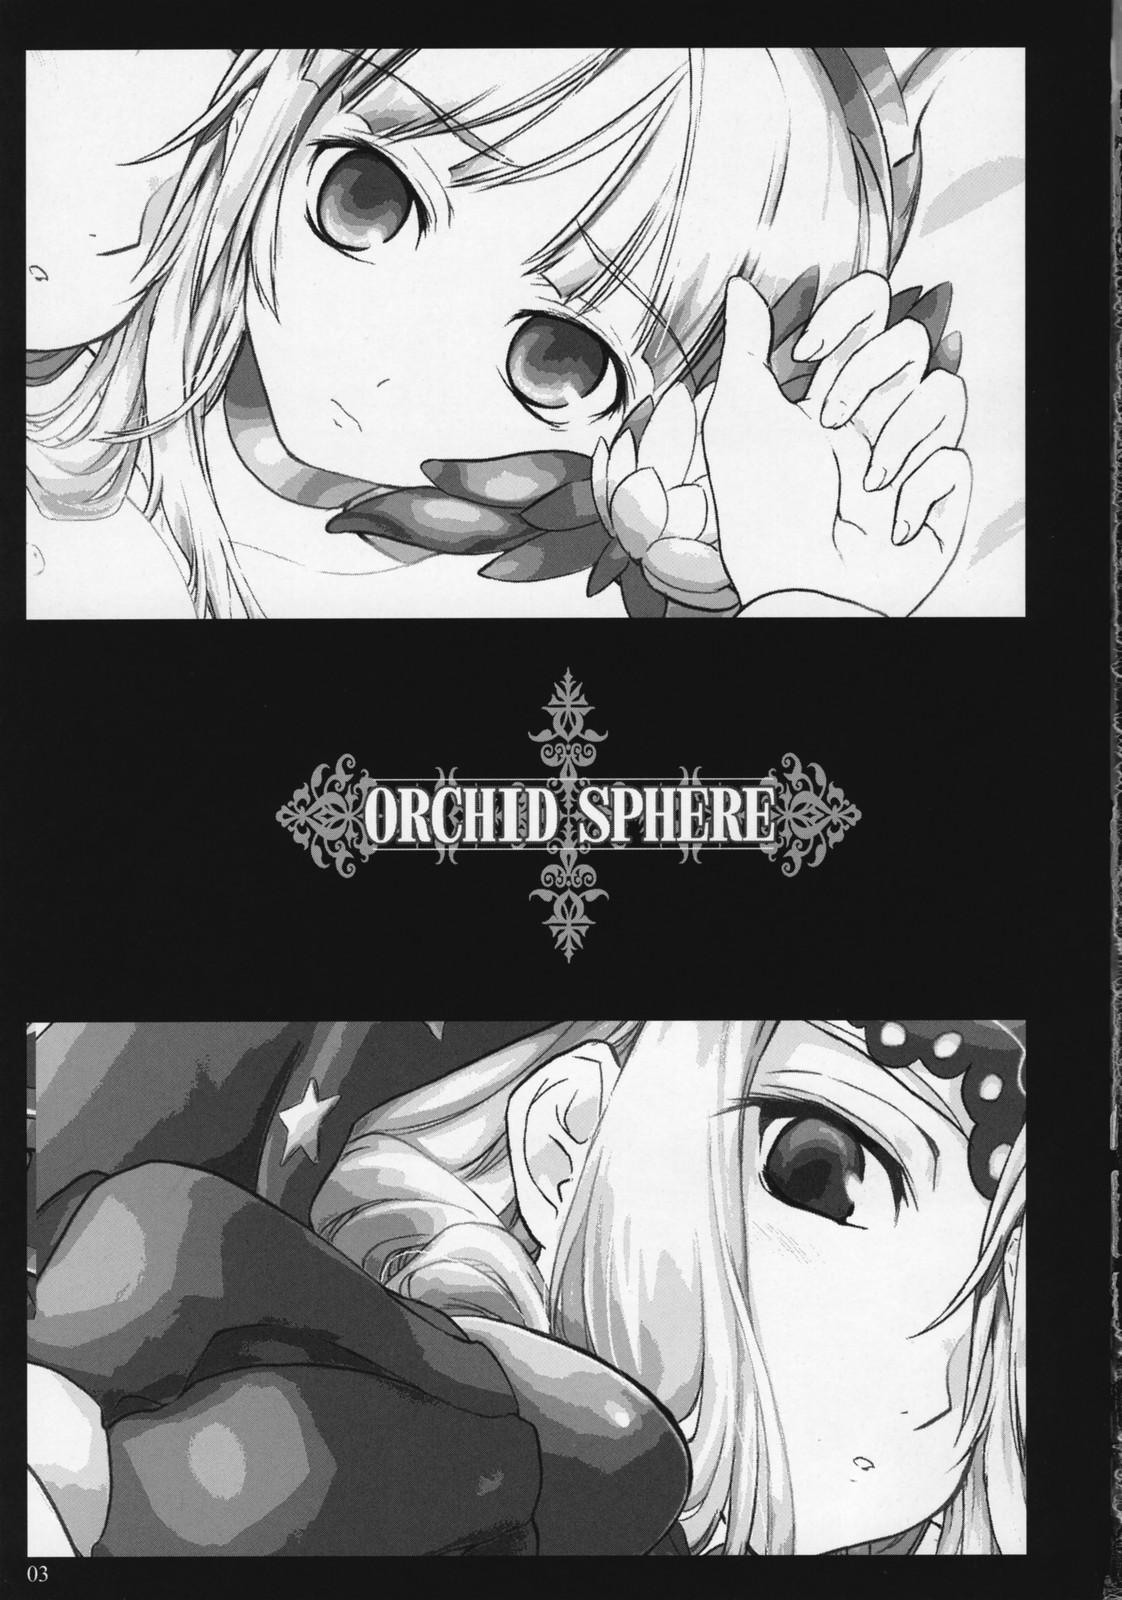 Shoplifter Orchid Sphere - Odin sphere Hard Cock - Page 2